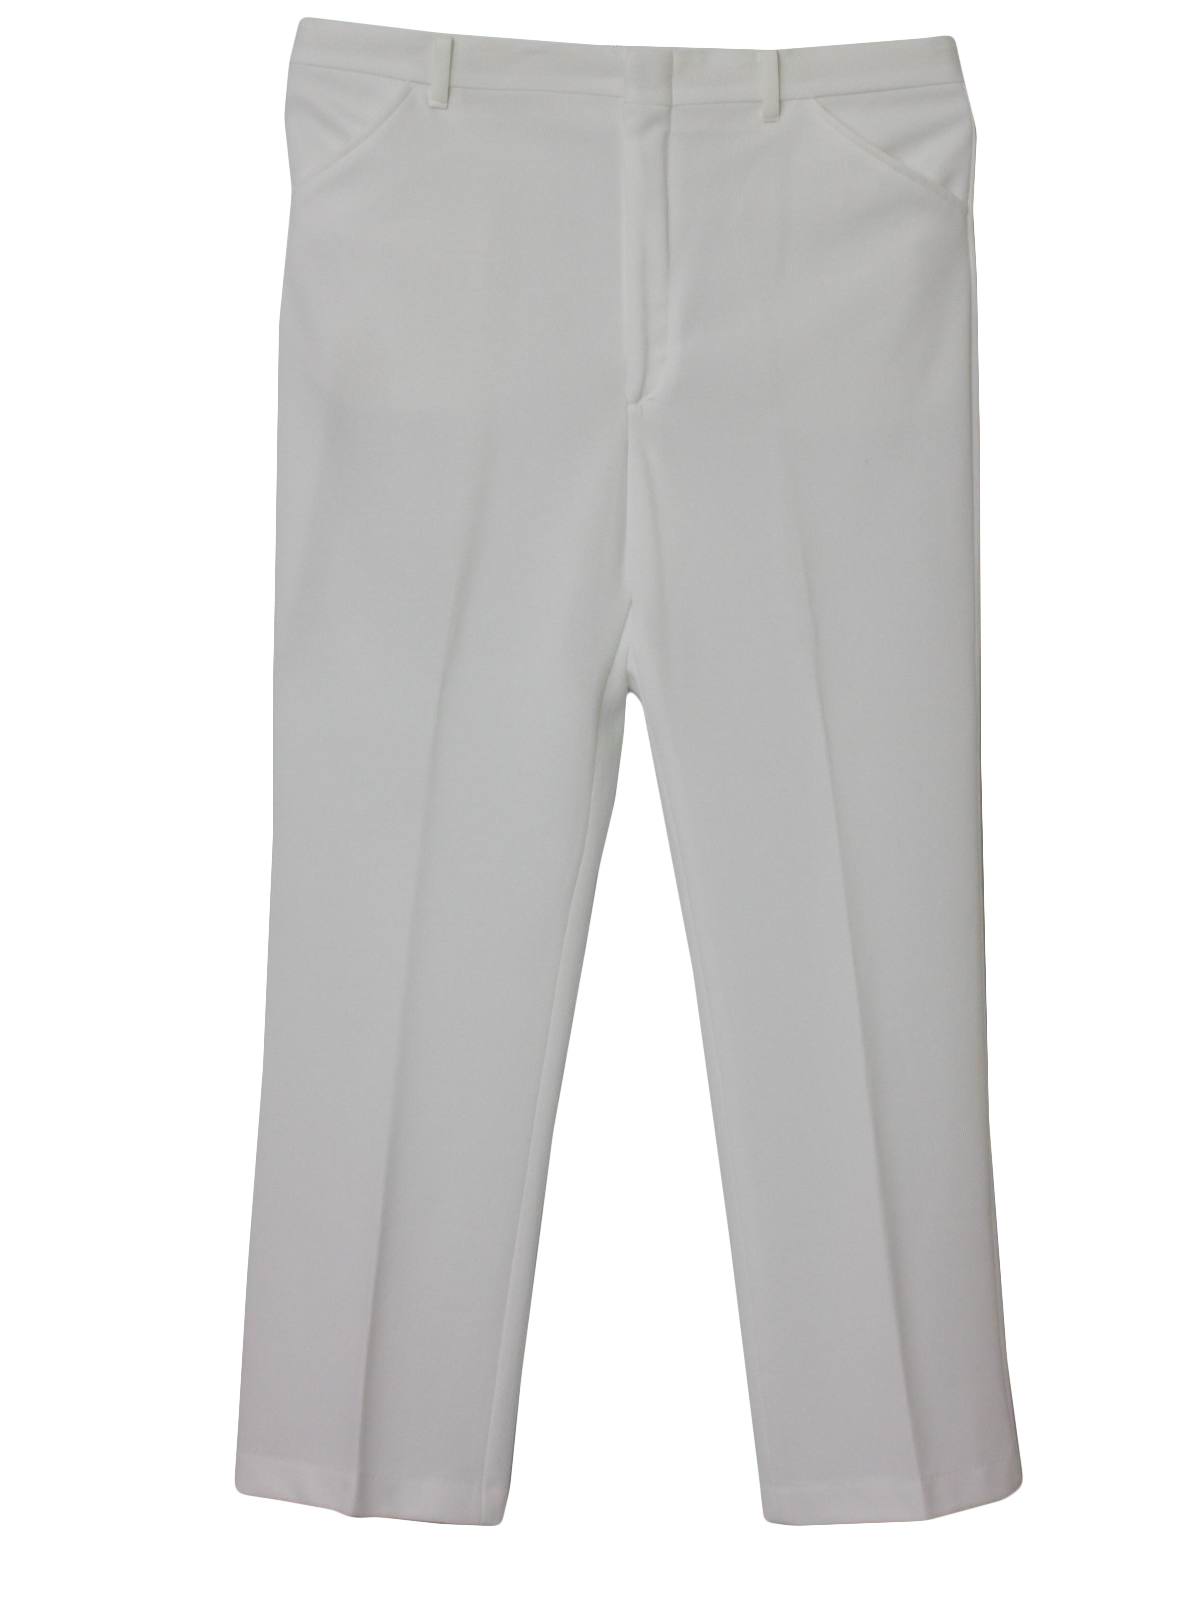 Retro 1970s Flared Pants / Flares: 70s -Haband- Mens white polyester ...